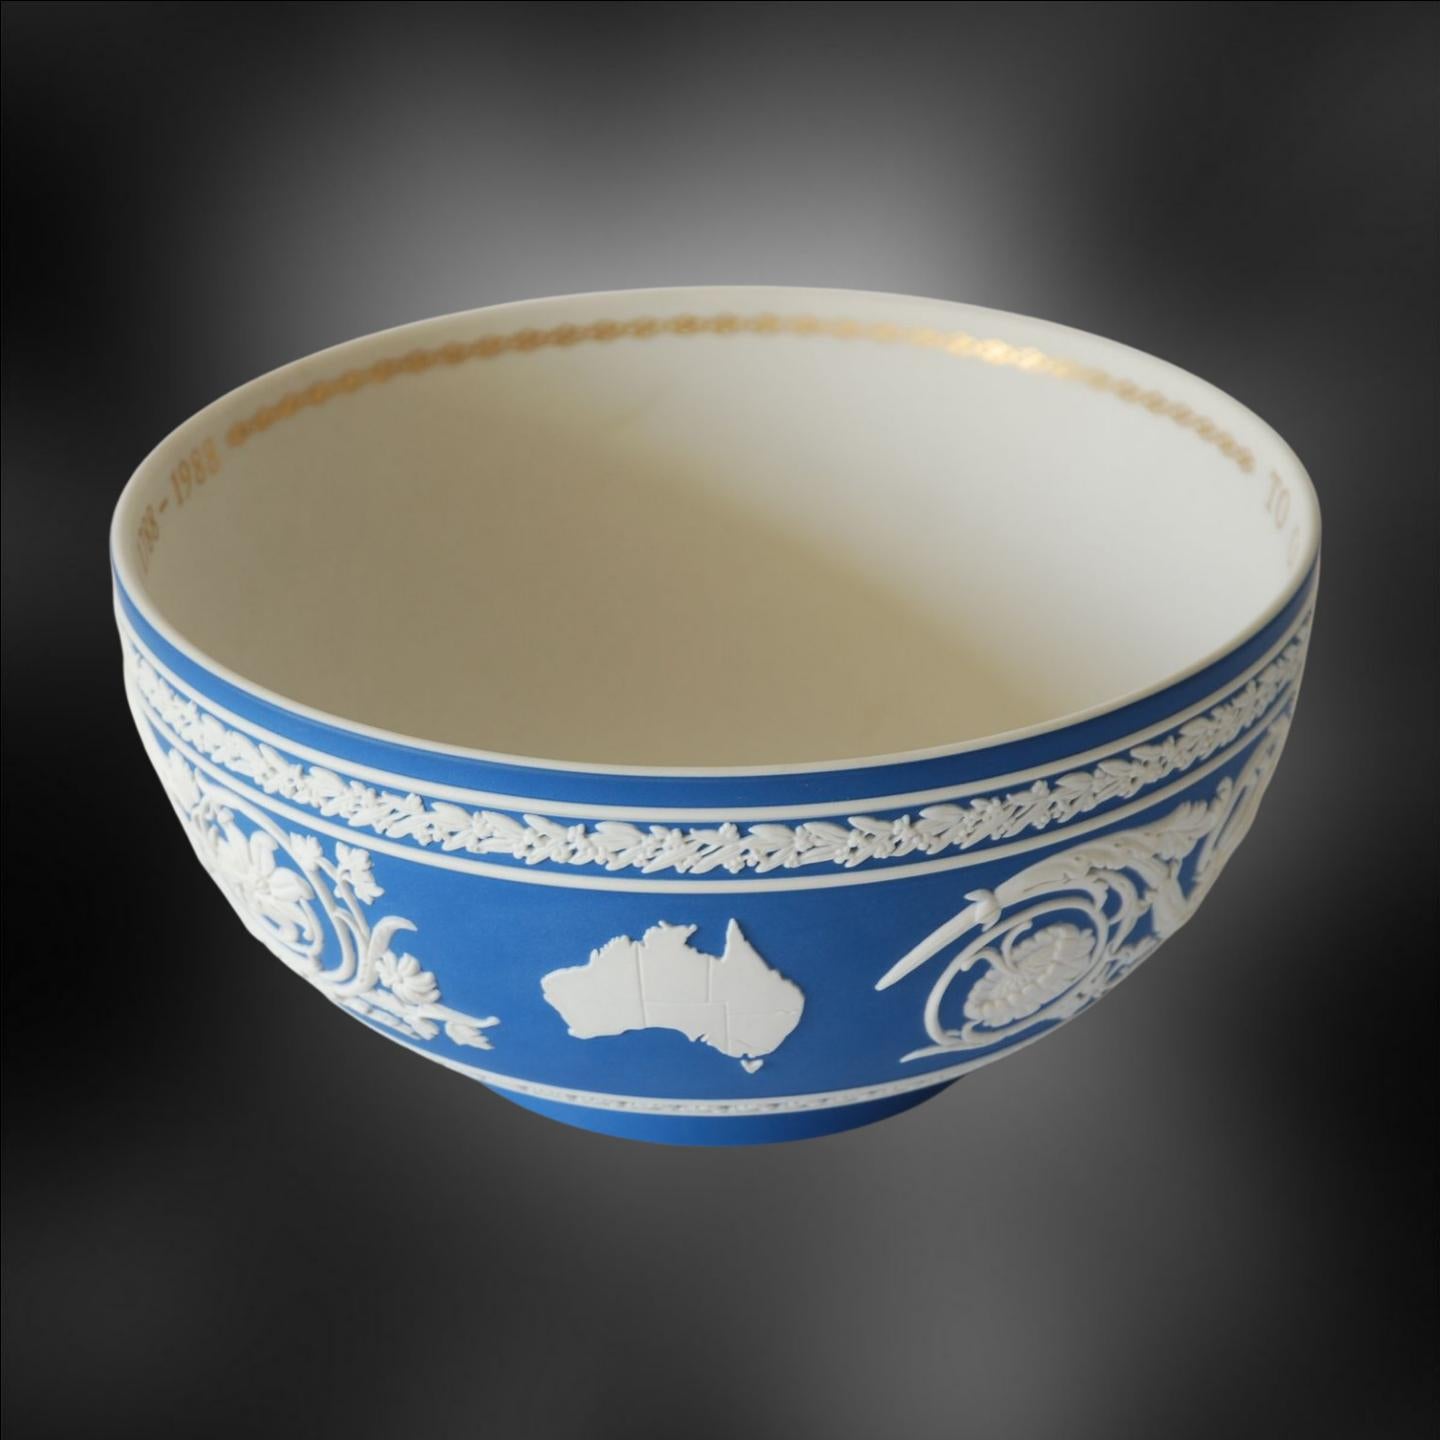 Neoclassical Australian Bicentenary Bowl, Wedgwood, circa 1988. Number 10 of 50 Made For Sale